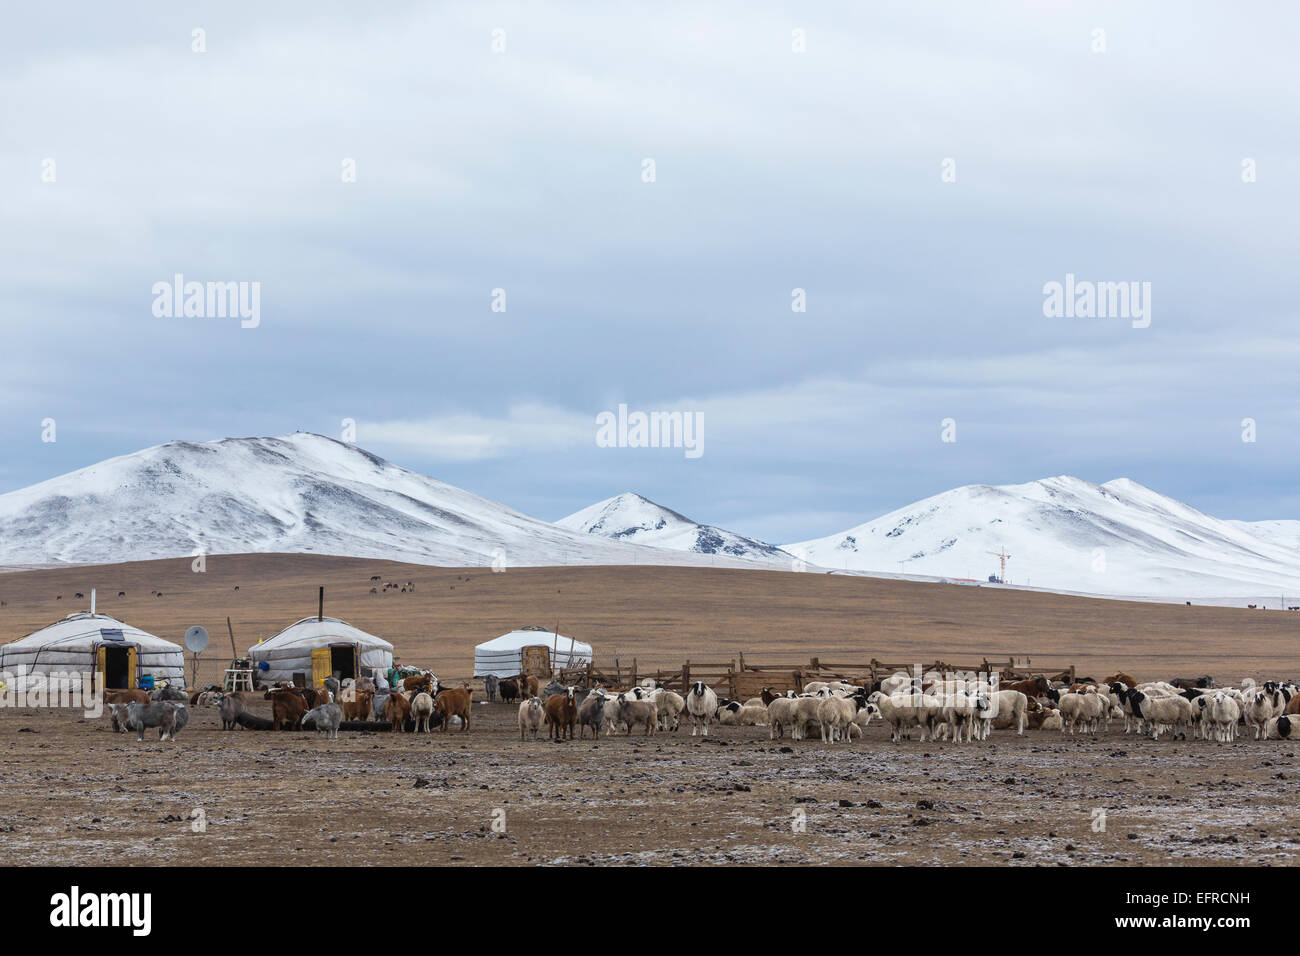 Cashmere Goats Grazing in Mongolia Stock Photo